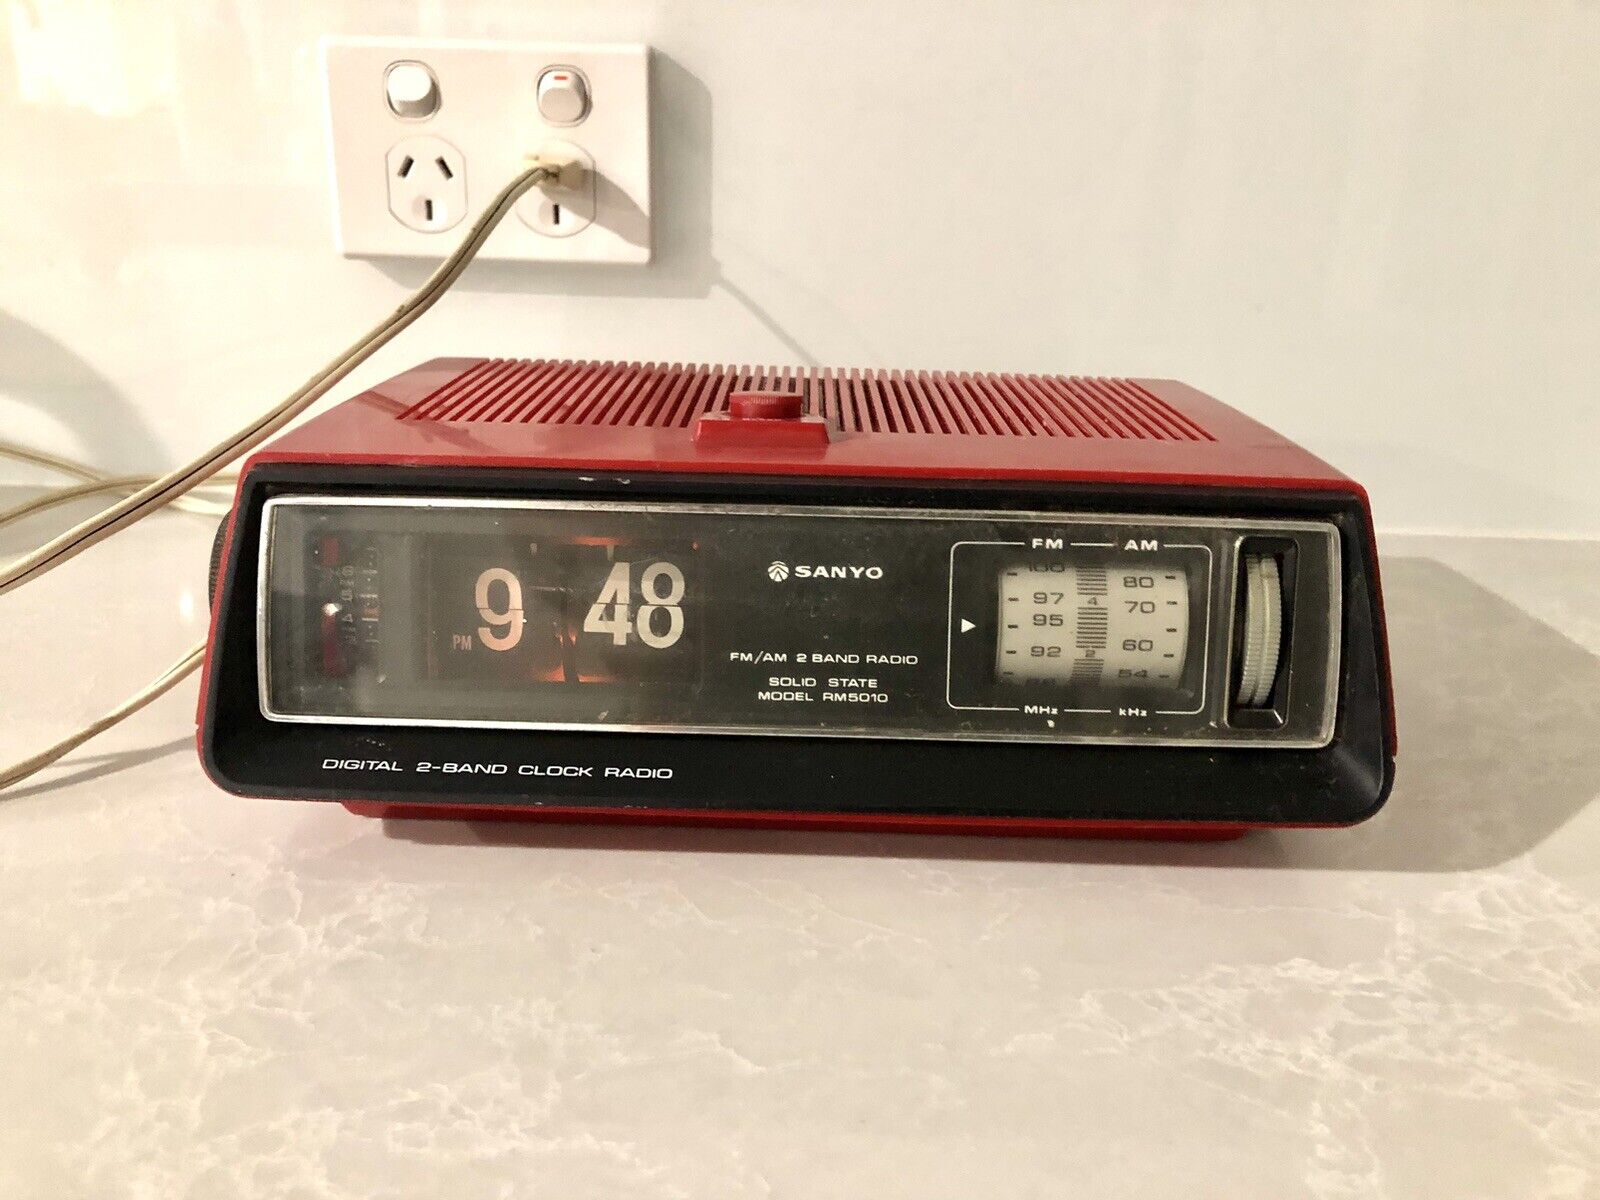 RED Vintage SANYO Flip Clock Radio RM-5010 - 2-Band AM/FM - 1970's - PARTS ONLY